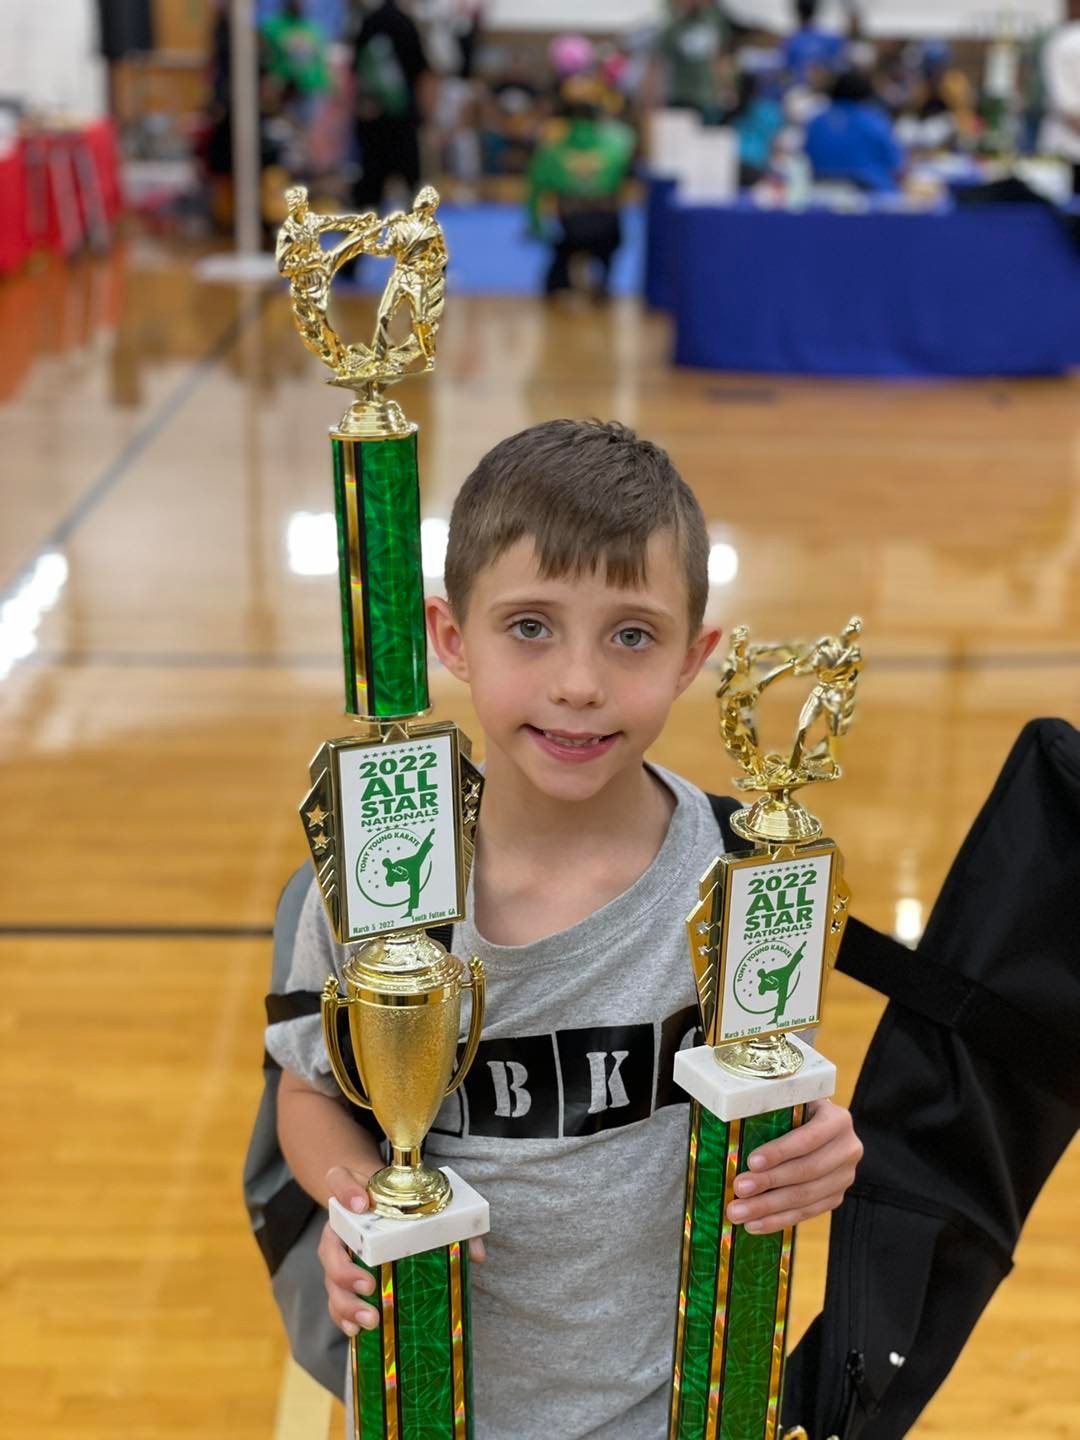 Jaxon Matthews snagged his first, FIRST PLACE trophy in the intermediate division this weekend at the 2022 All Star Nationals.